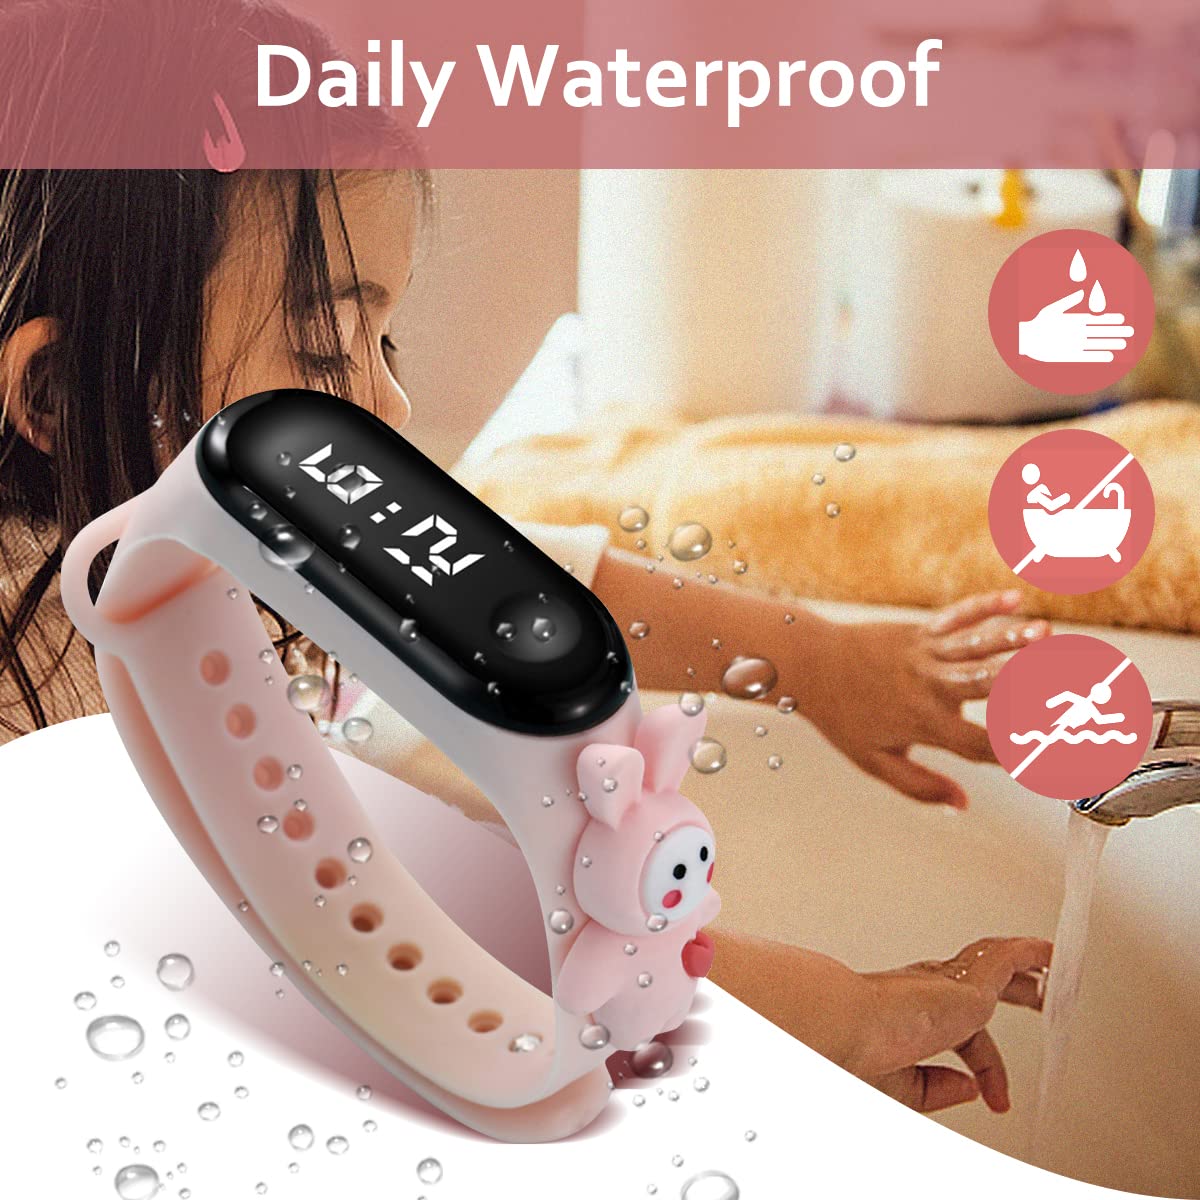 A ALPS Kids Watch, Girls Watch Set 3-12 Years Old, Digital Sports Toddler Daily Waterproof LED Design, Cute Cartoon Gifts for Children (3PC / 4PC)